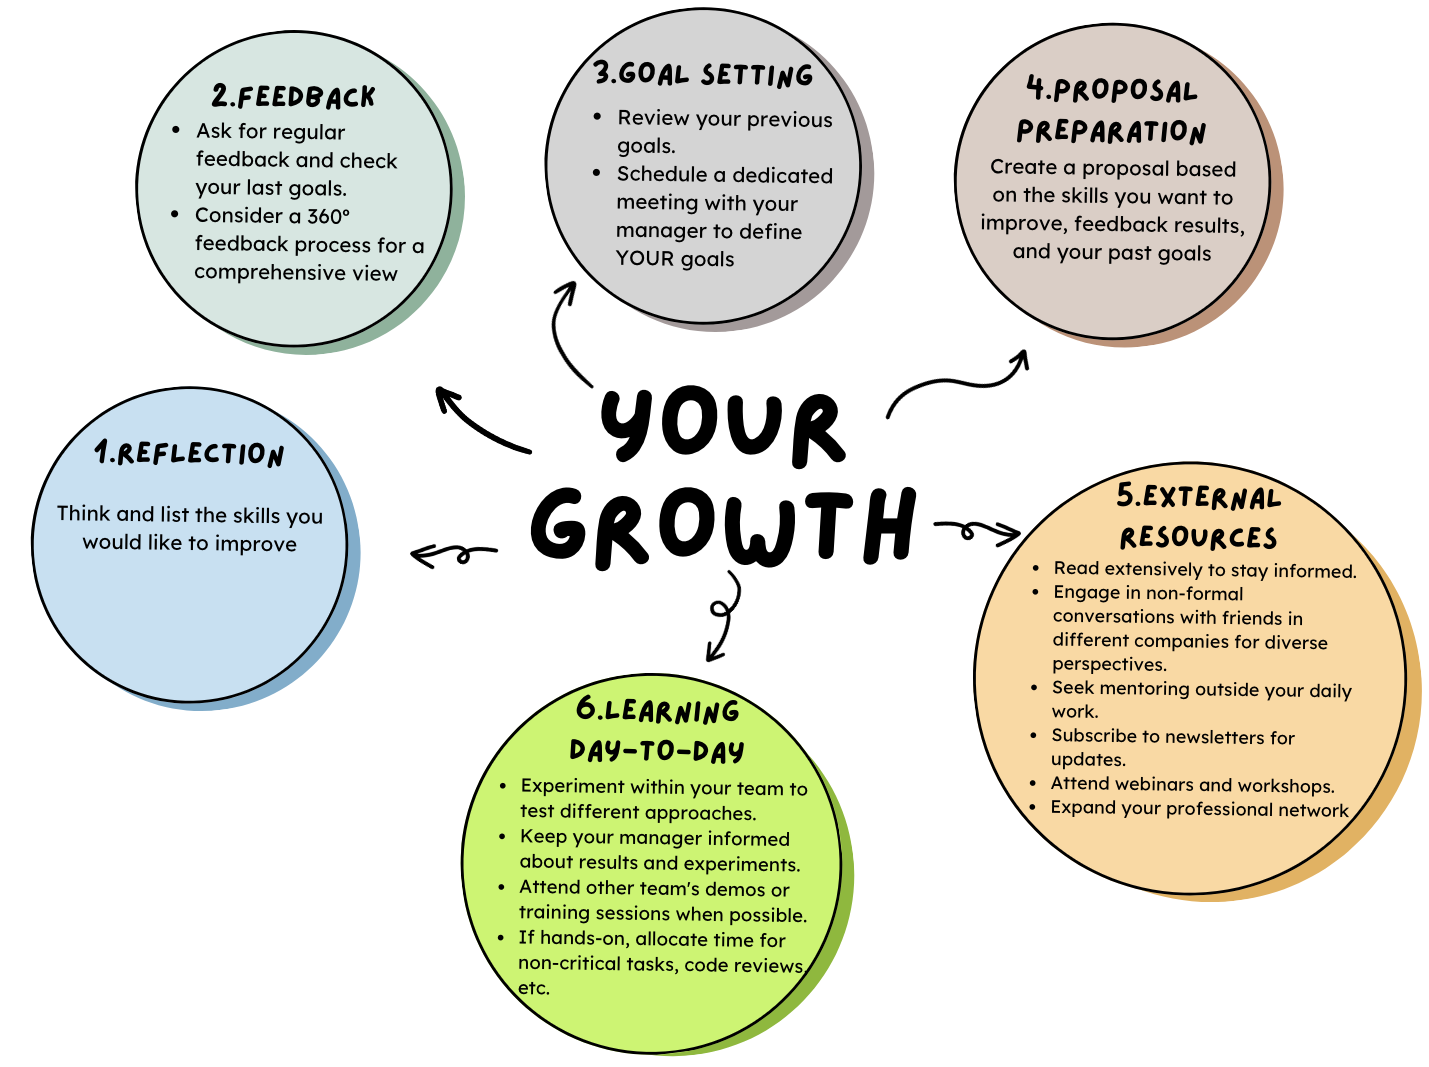 responsible-for-your-growth